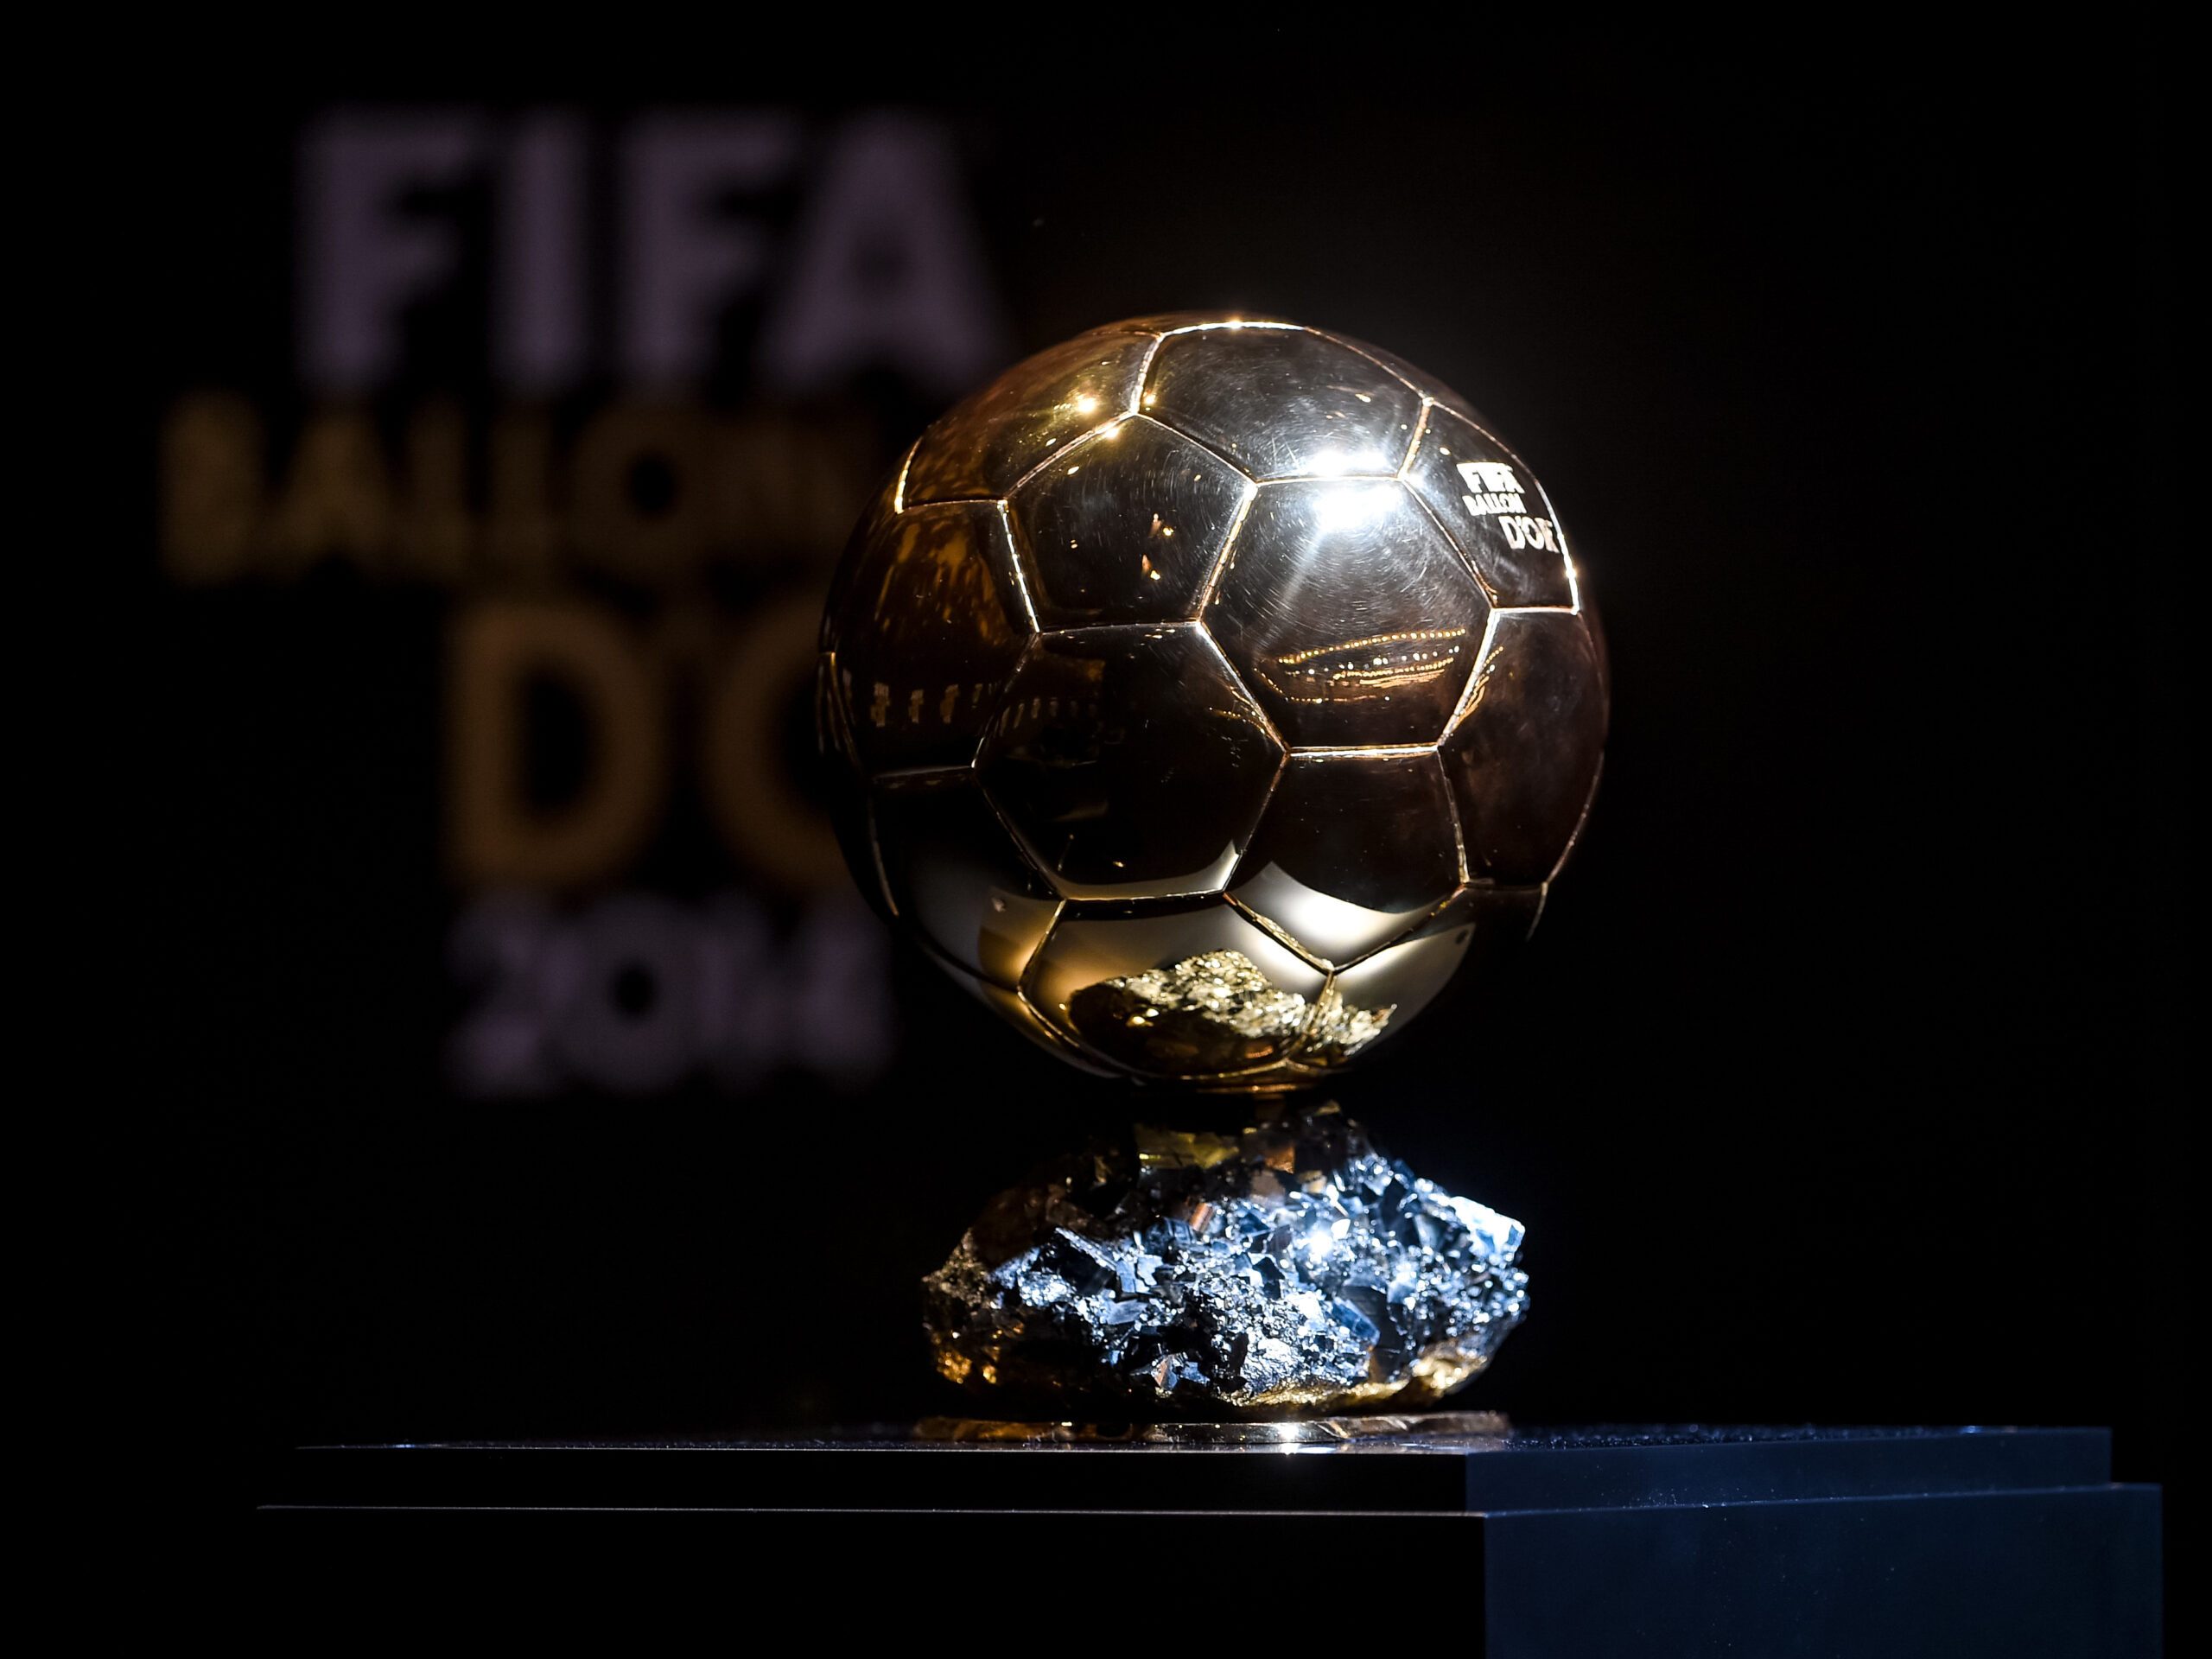 ZURICH,SWITZERLAND,12.JAN.15 - SOCCER - FIFA World Player Gala, Ballon d Or 2014. Image shows the trophy for the FIFA Ballon d Or 2014.